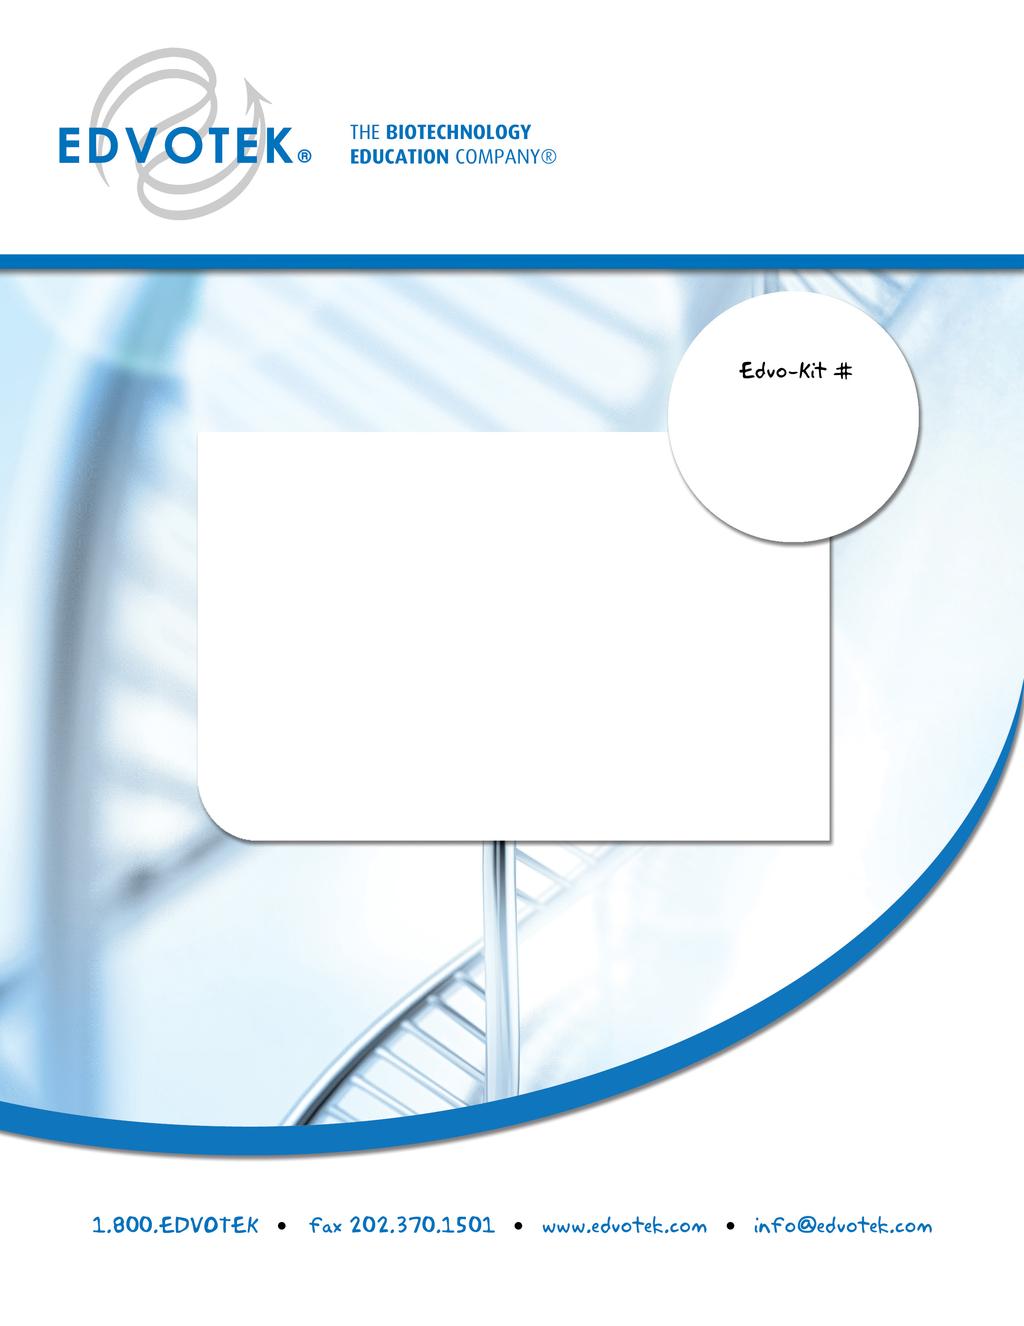 REVISED & UPDATED Edvo-Kit #269 Introduction to ELISA Reactions Experiment Objective: This experiment introduces concepts and methodologies of